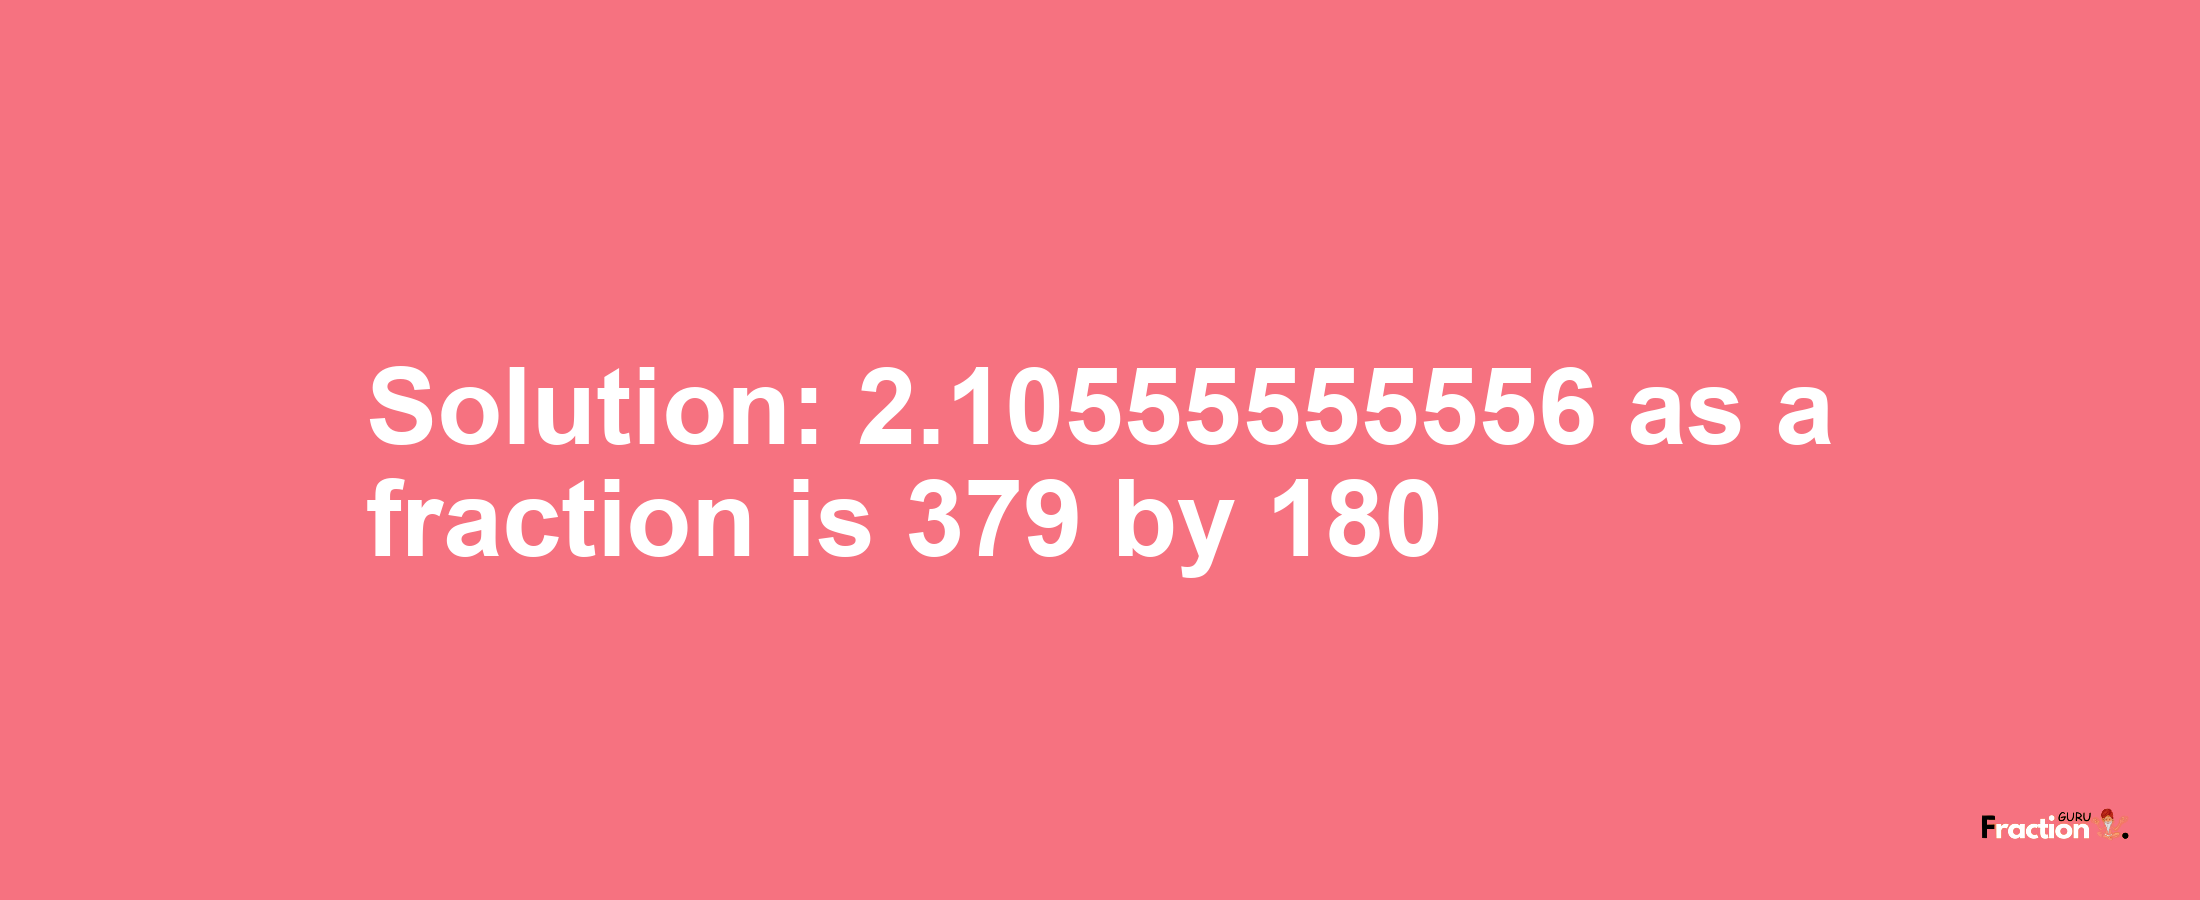 Solution:2.10555555556 as a fraction is 379/180